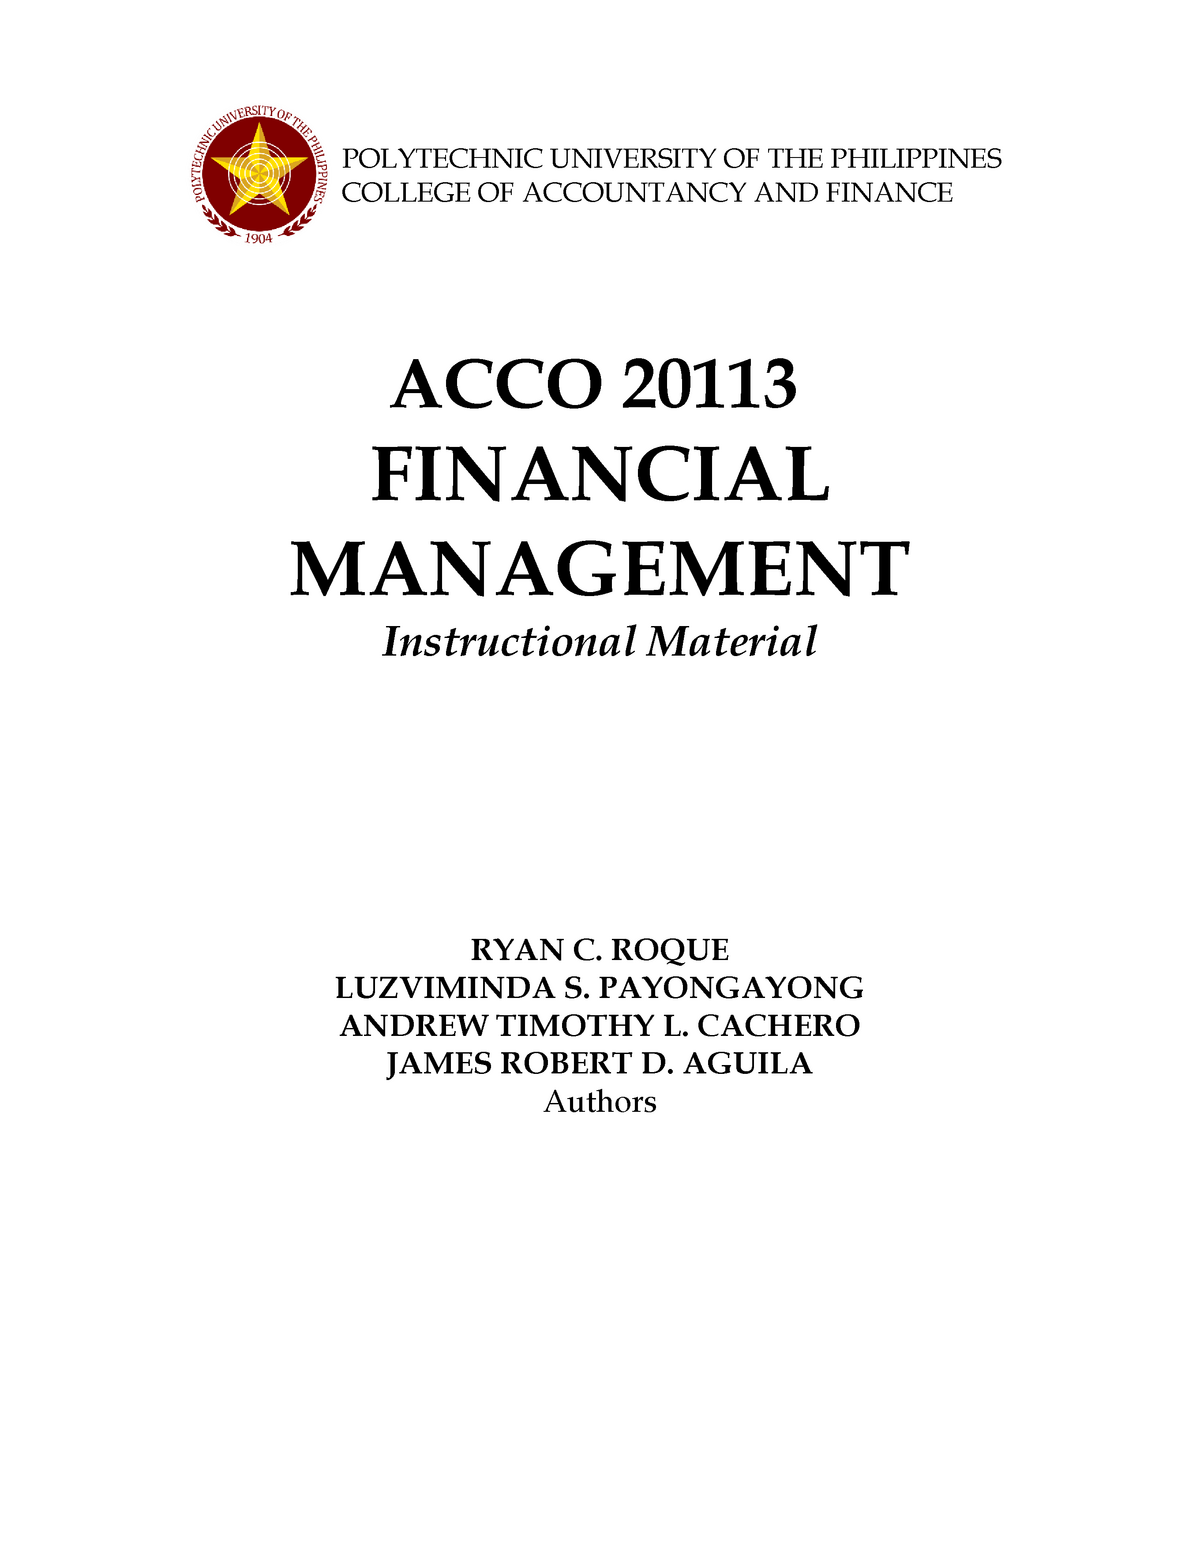 thesis title for financial management students